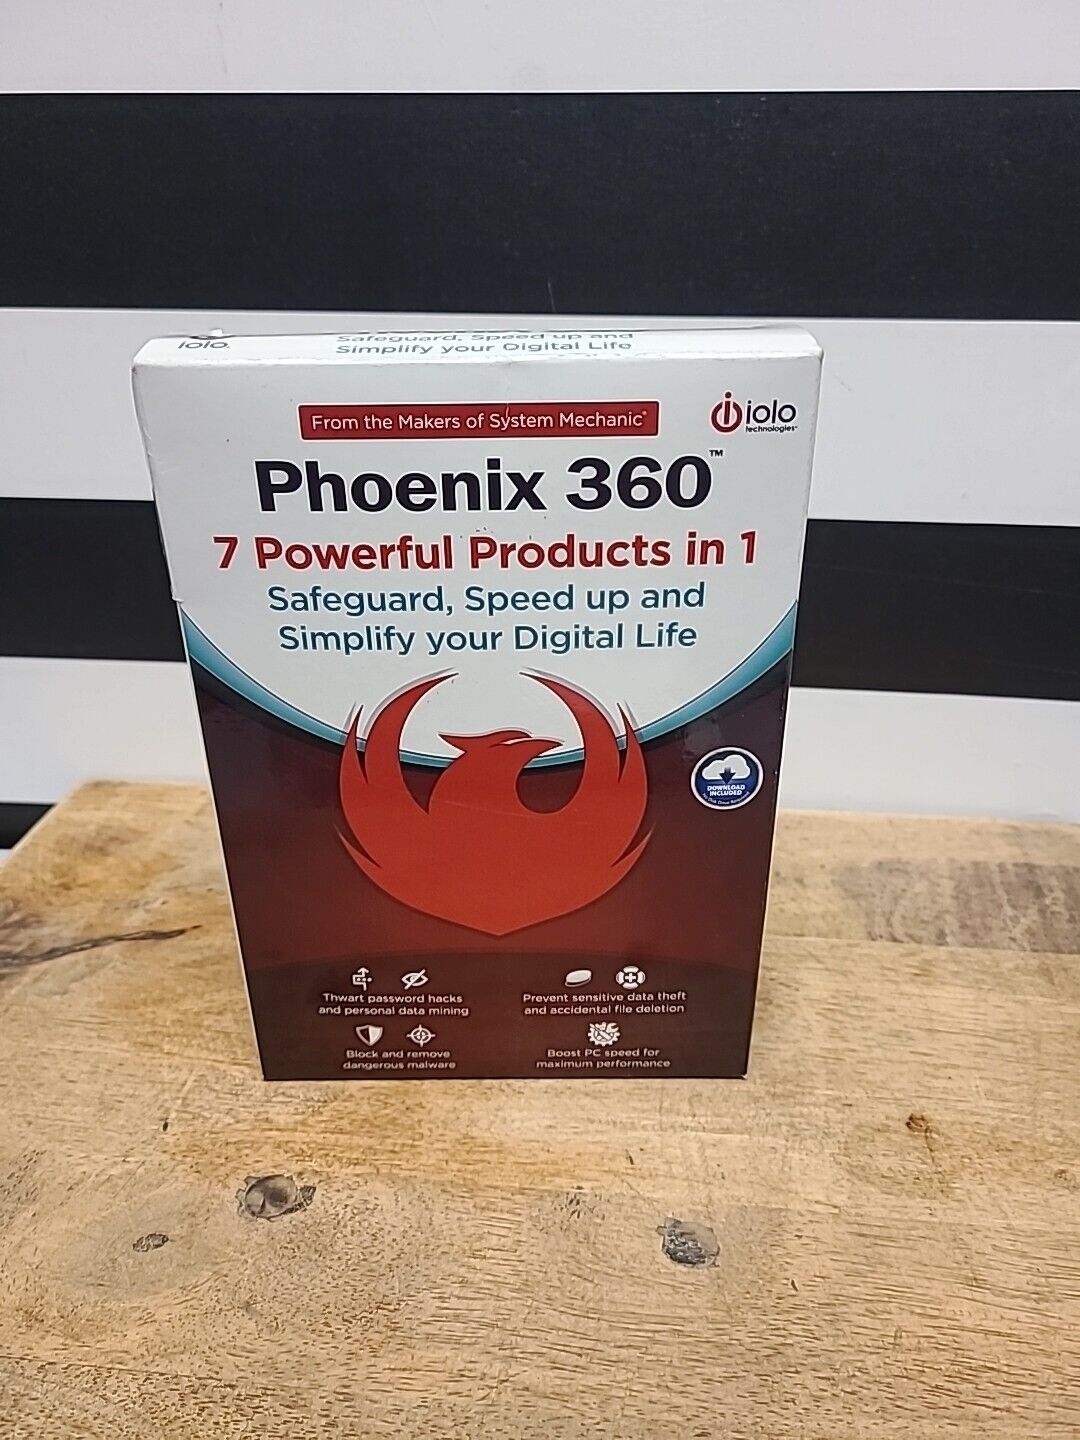 IOLO PHOENIX 360 NEW iolo Phoenix 360 7 Powerful Products in 1 SEALED RETAIL NEW